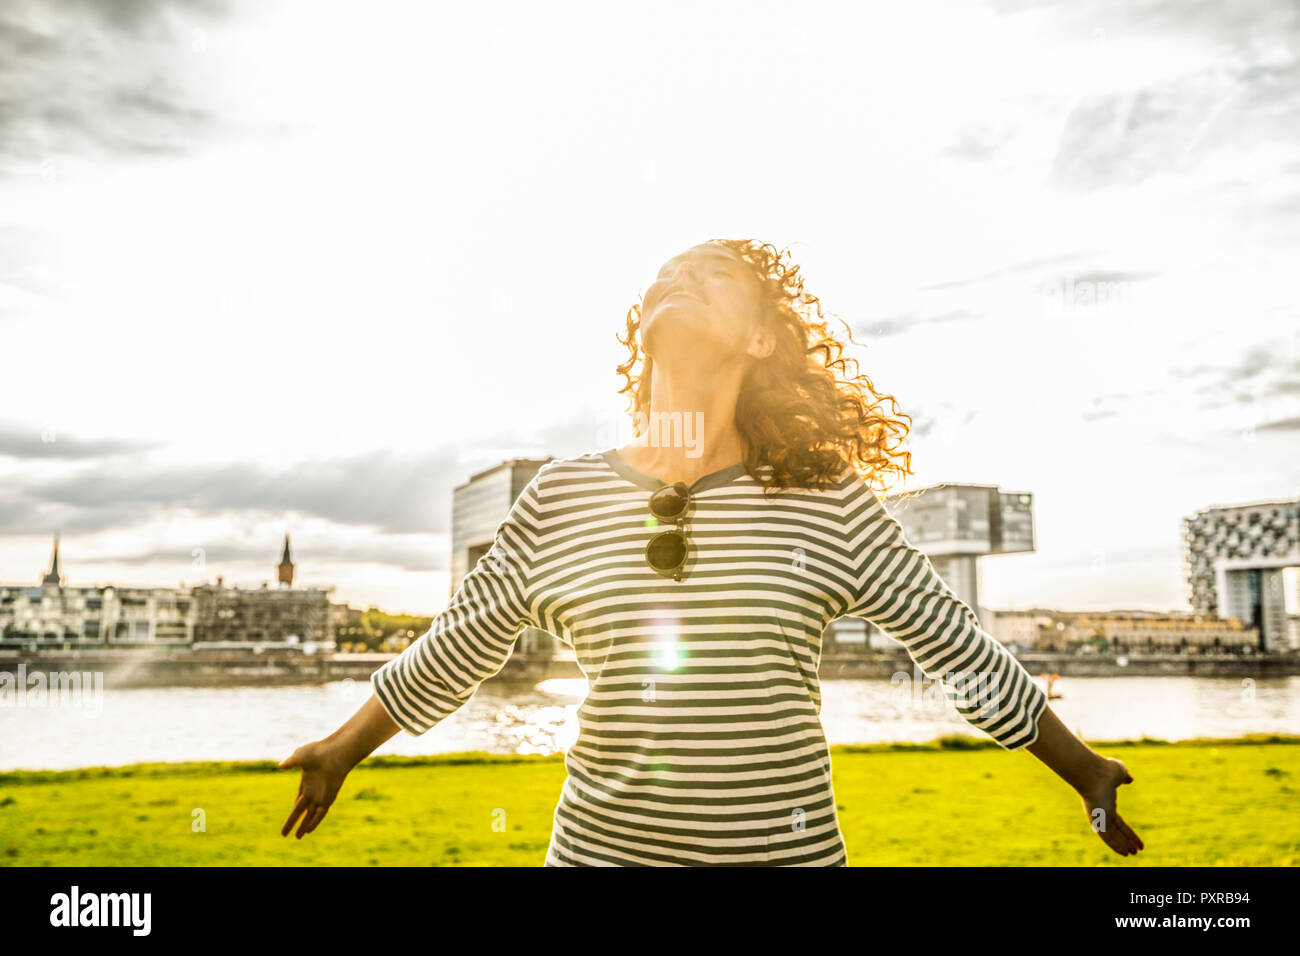 Germany, Cologne, young woman enjoying sunlight Stock Photo